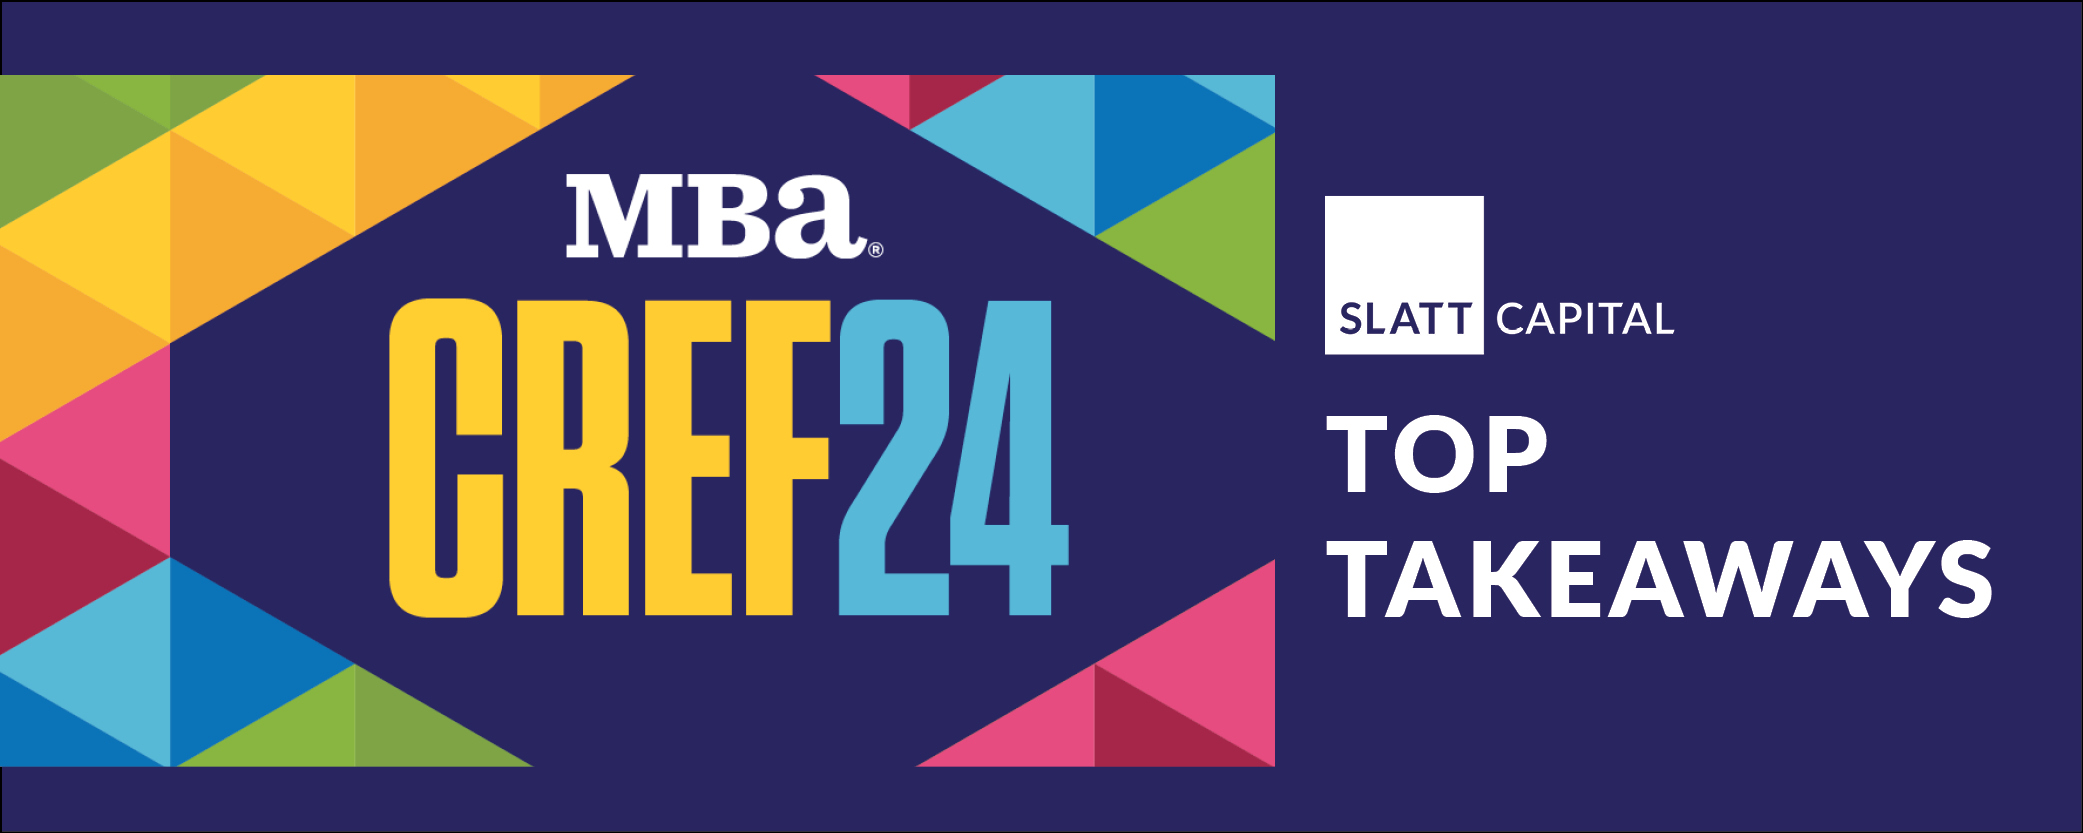 Top takeaways: mba cref24 conference